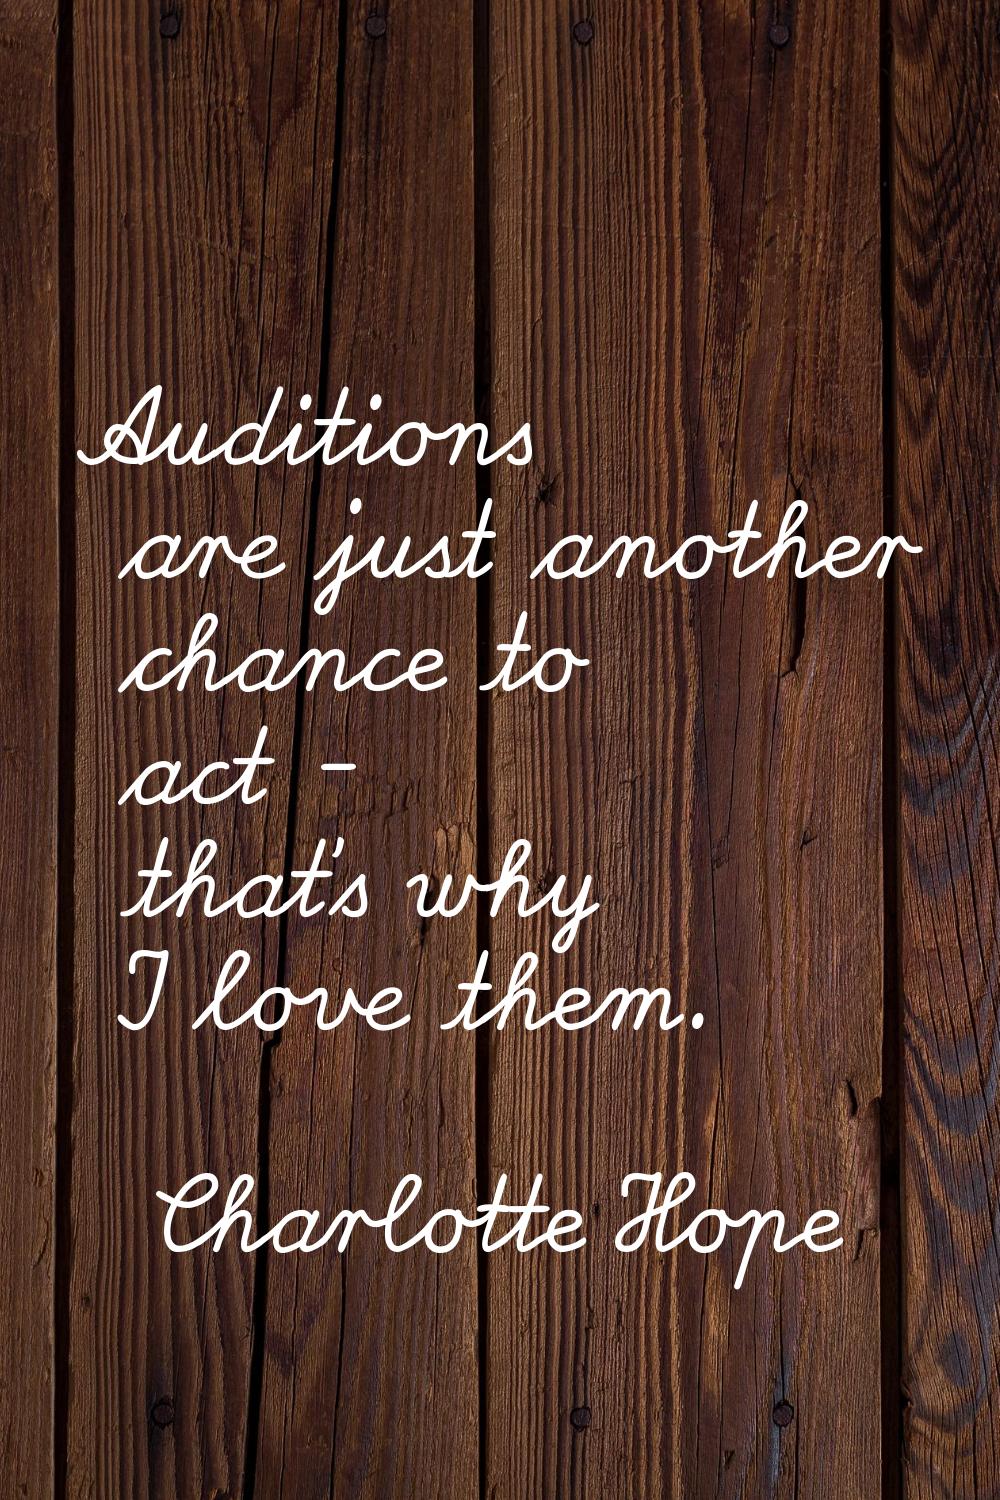 Auditions are just another chance to act - that's why I love them.